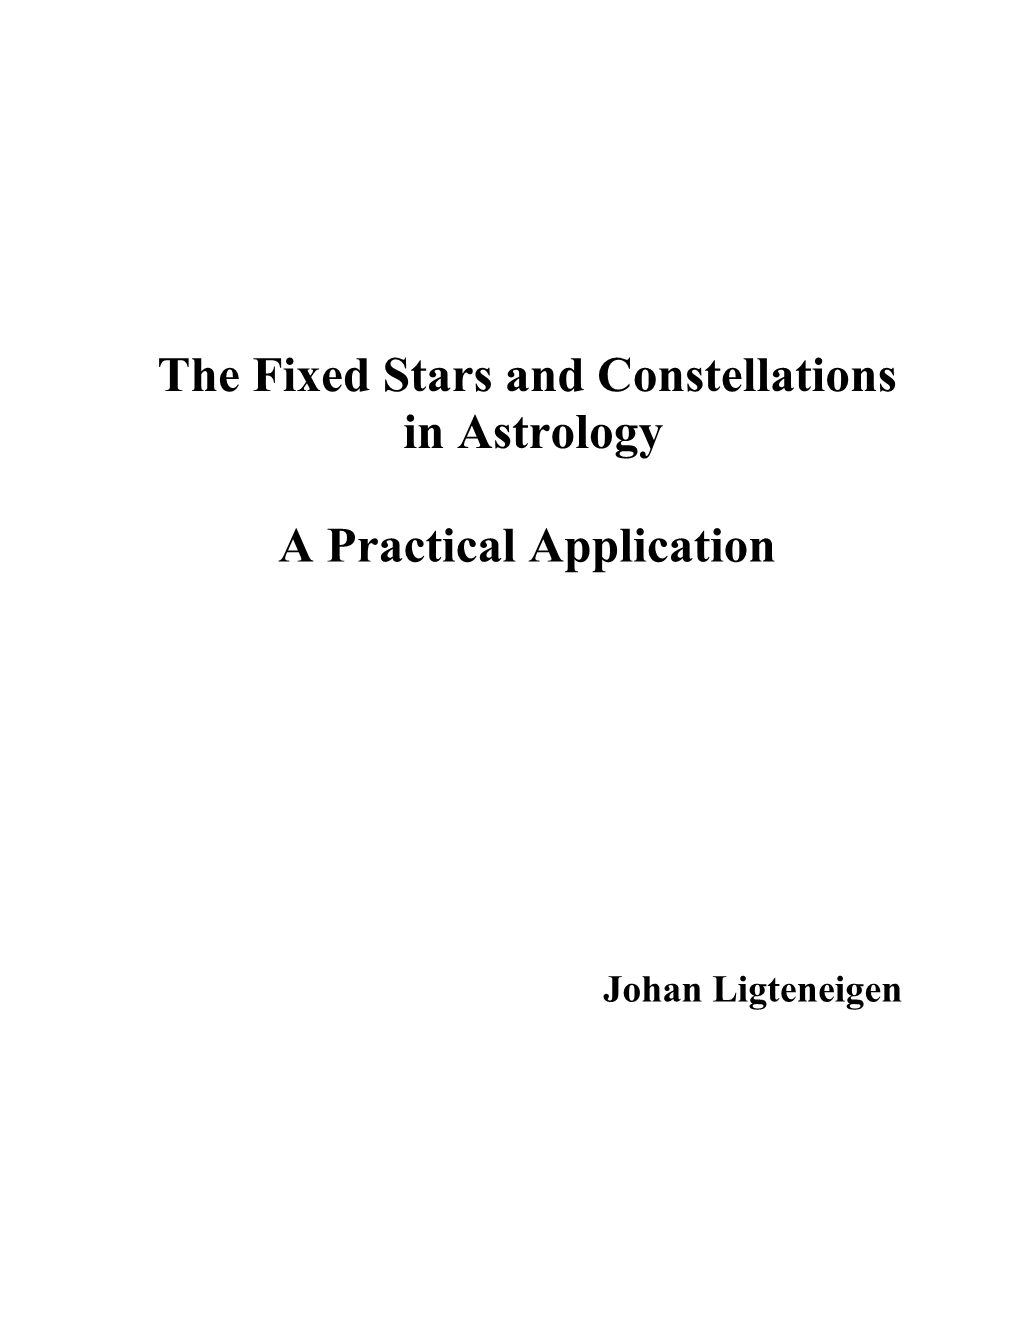 The Fixed Stars and Constellations in Astrology a Practical Application